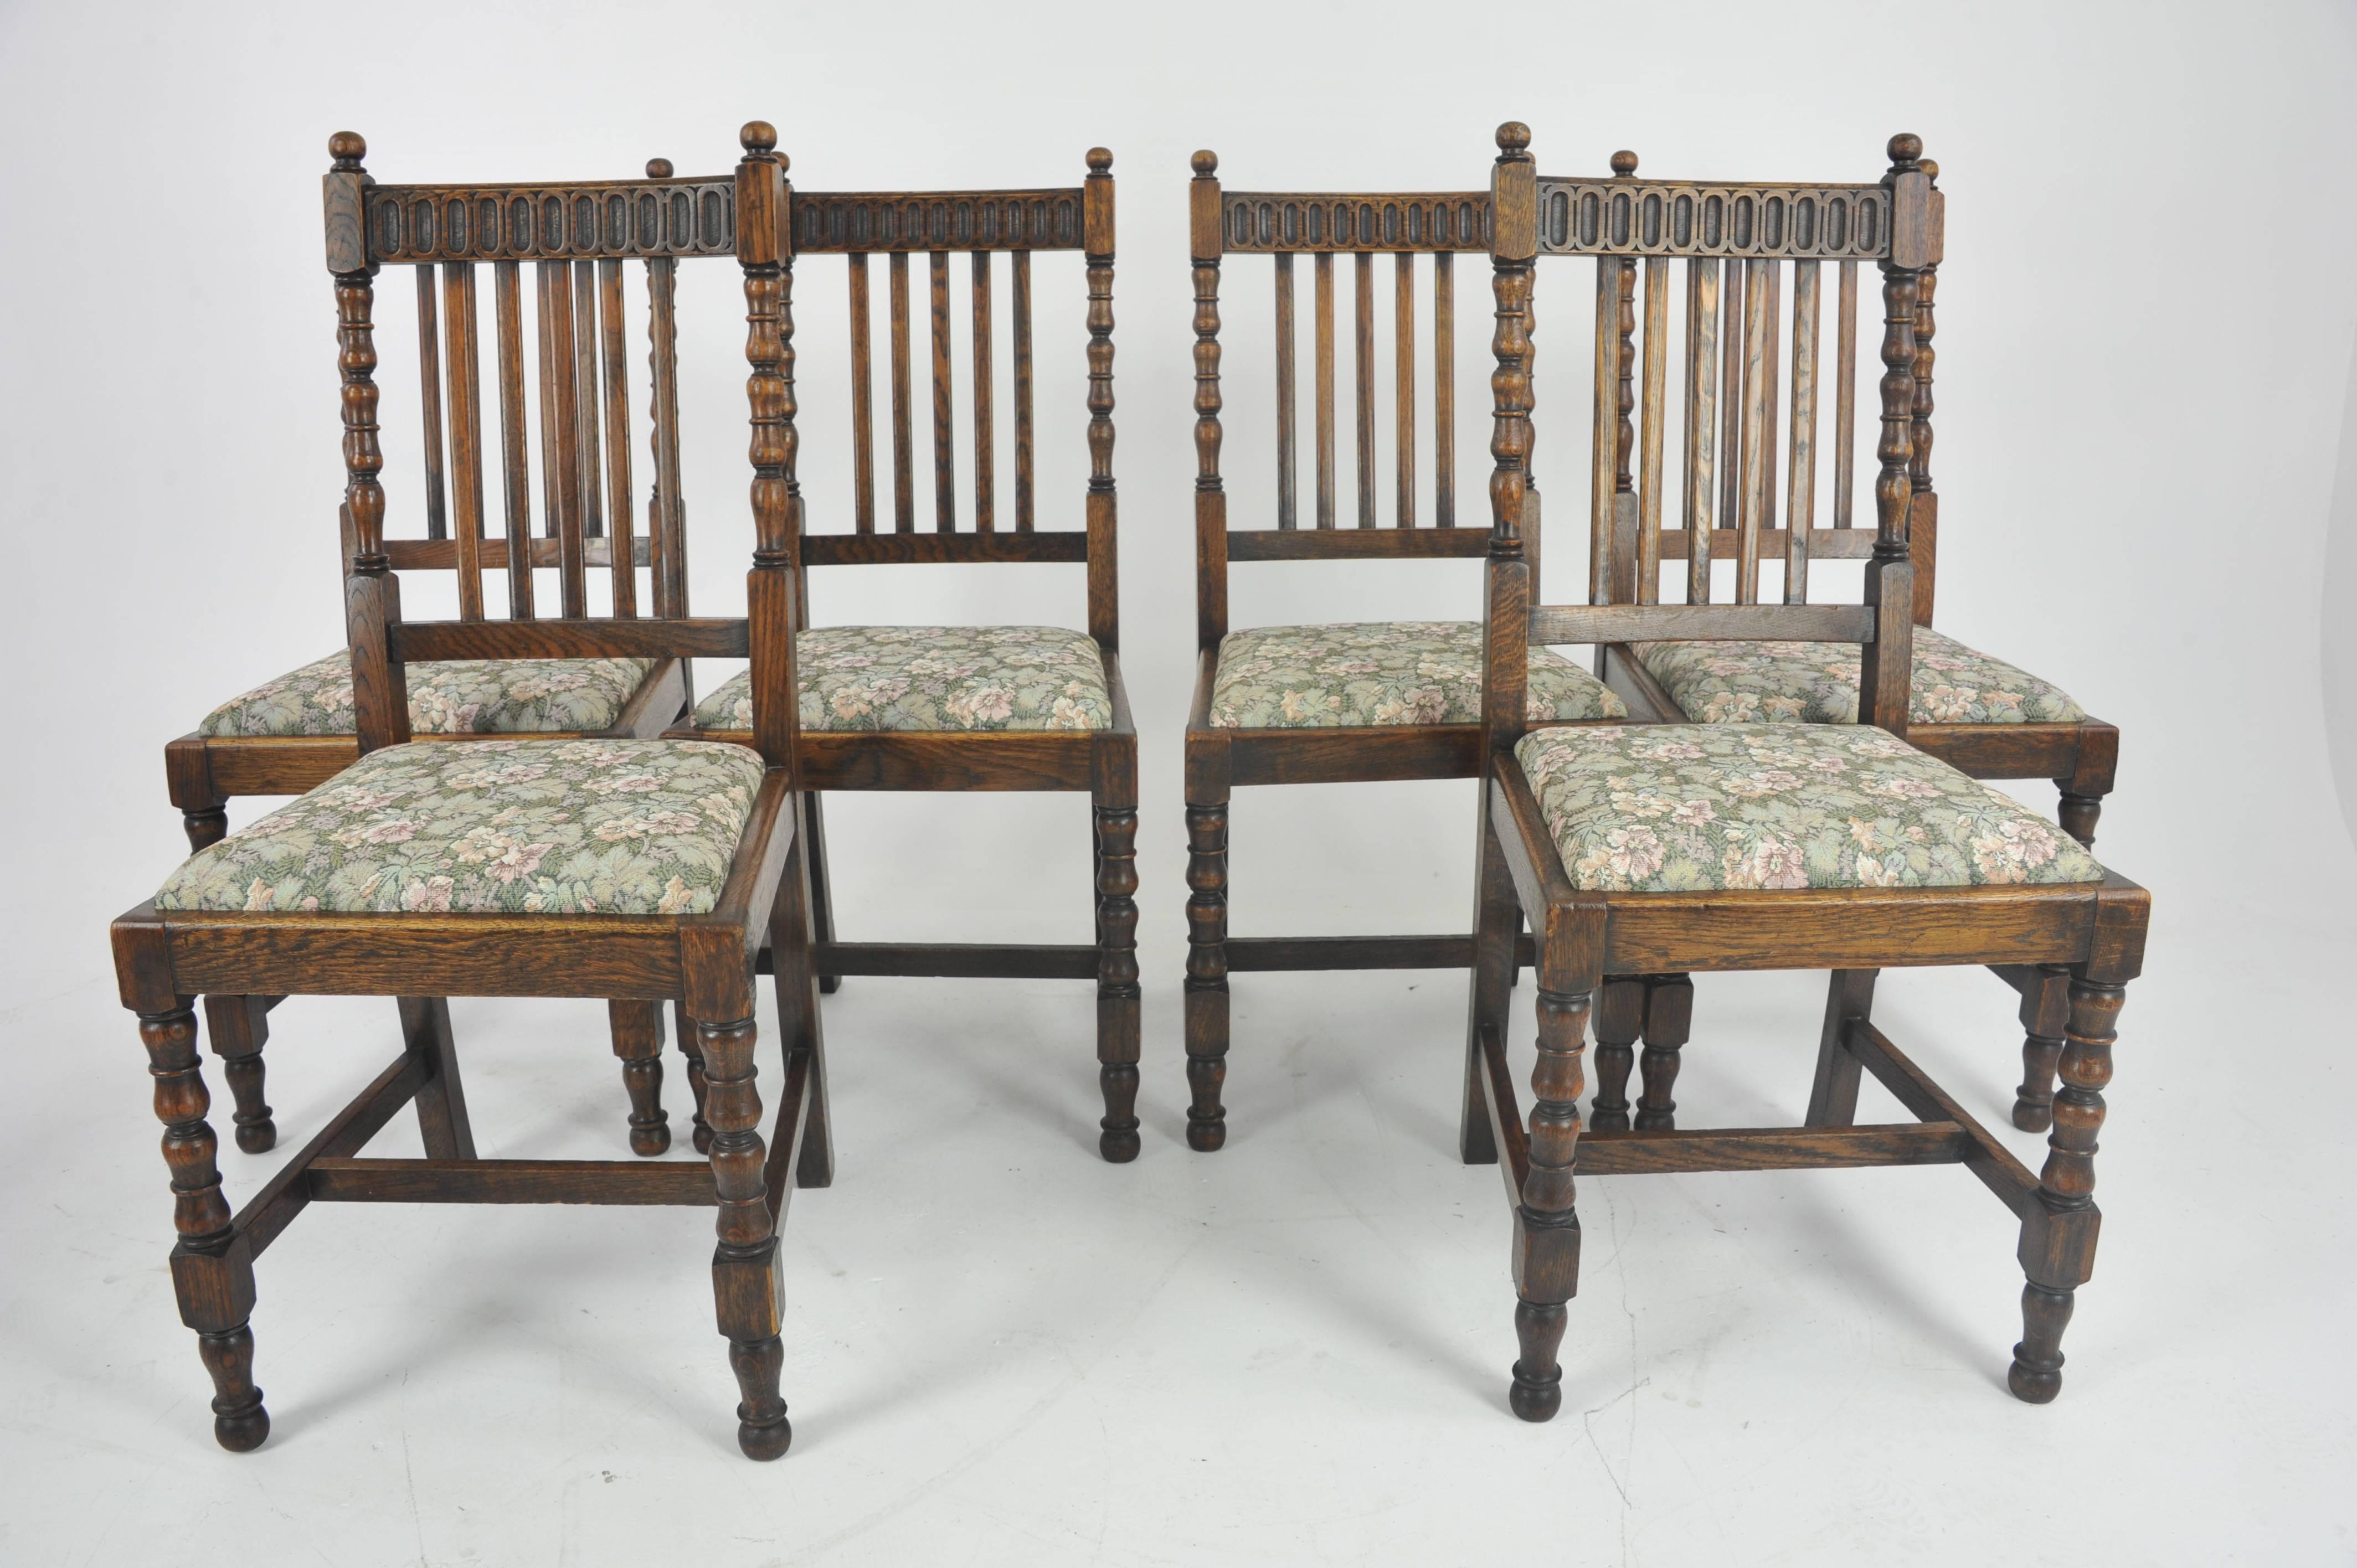 French Antique Dining Chairs, 8 High Back Chairs, Oak, France, 1900 GREATLY REDUCED!!